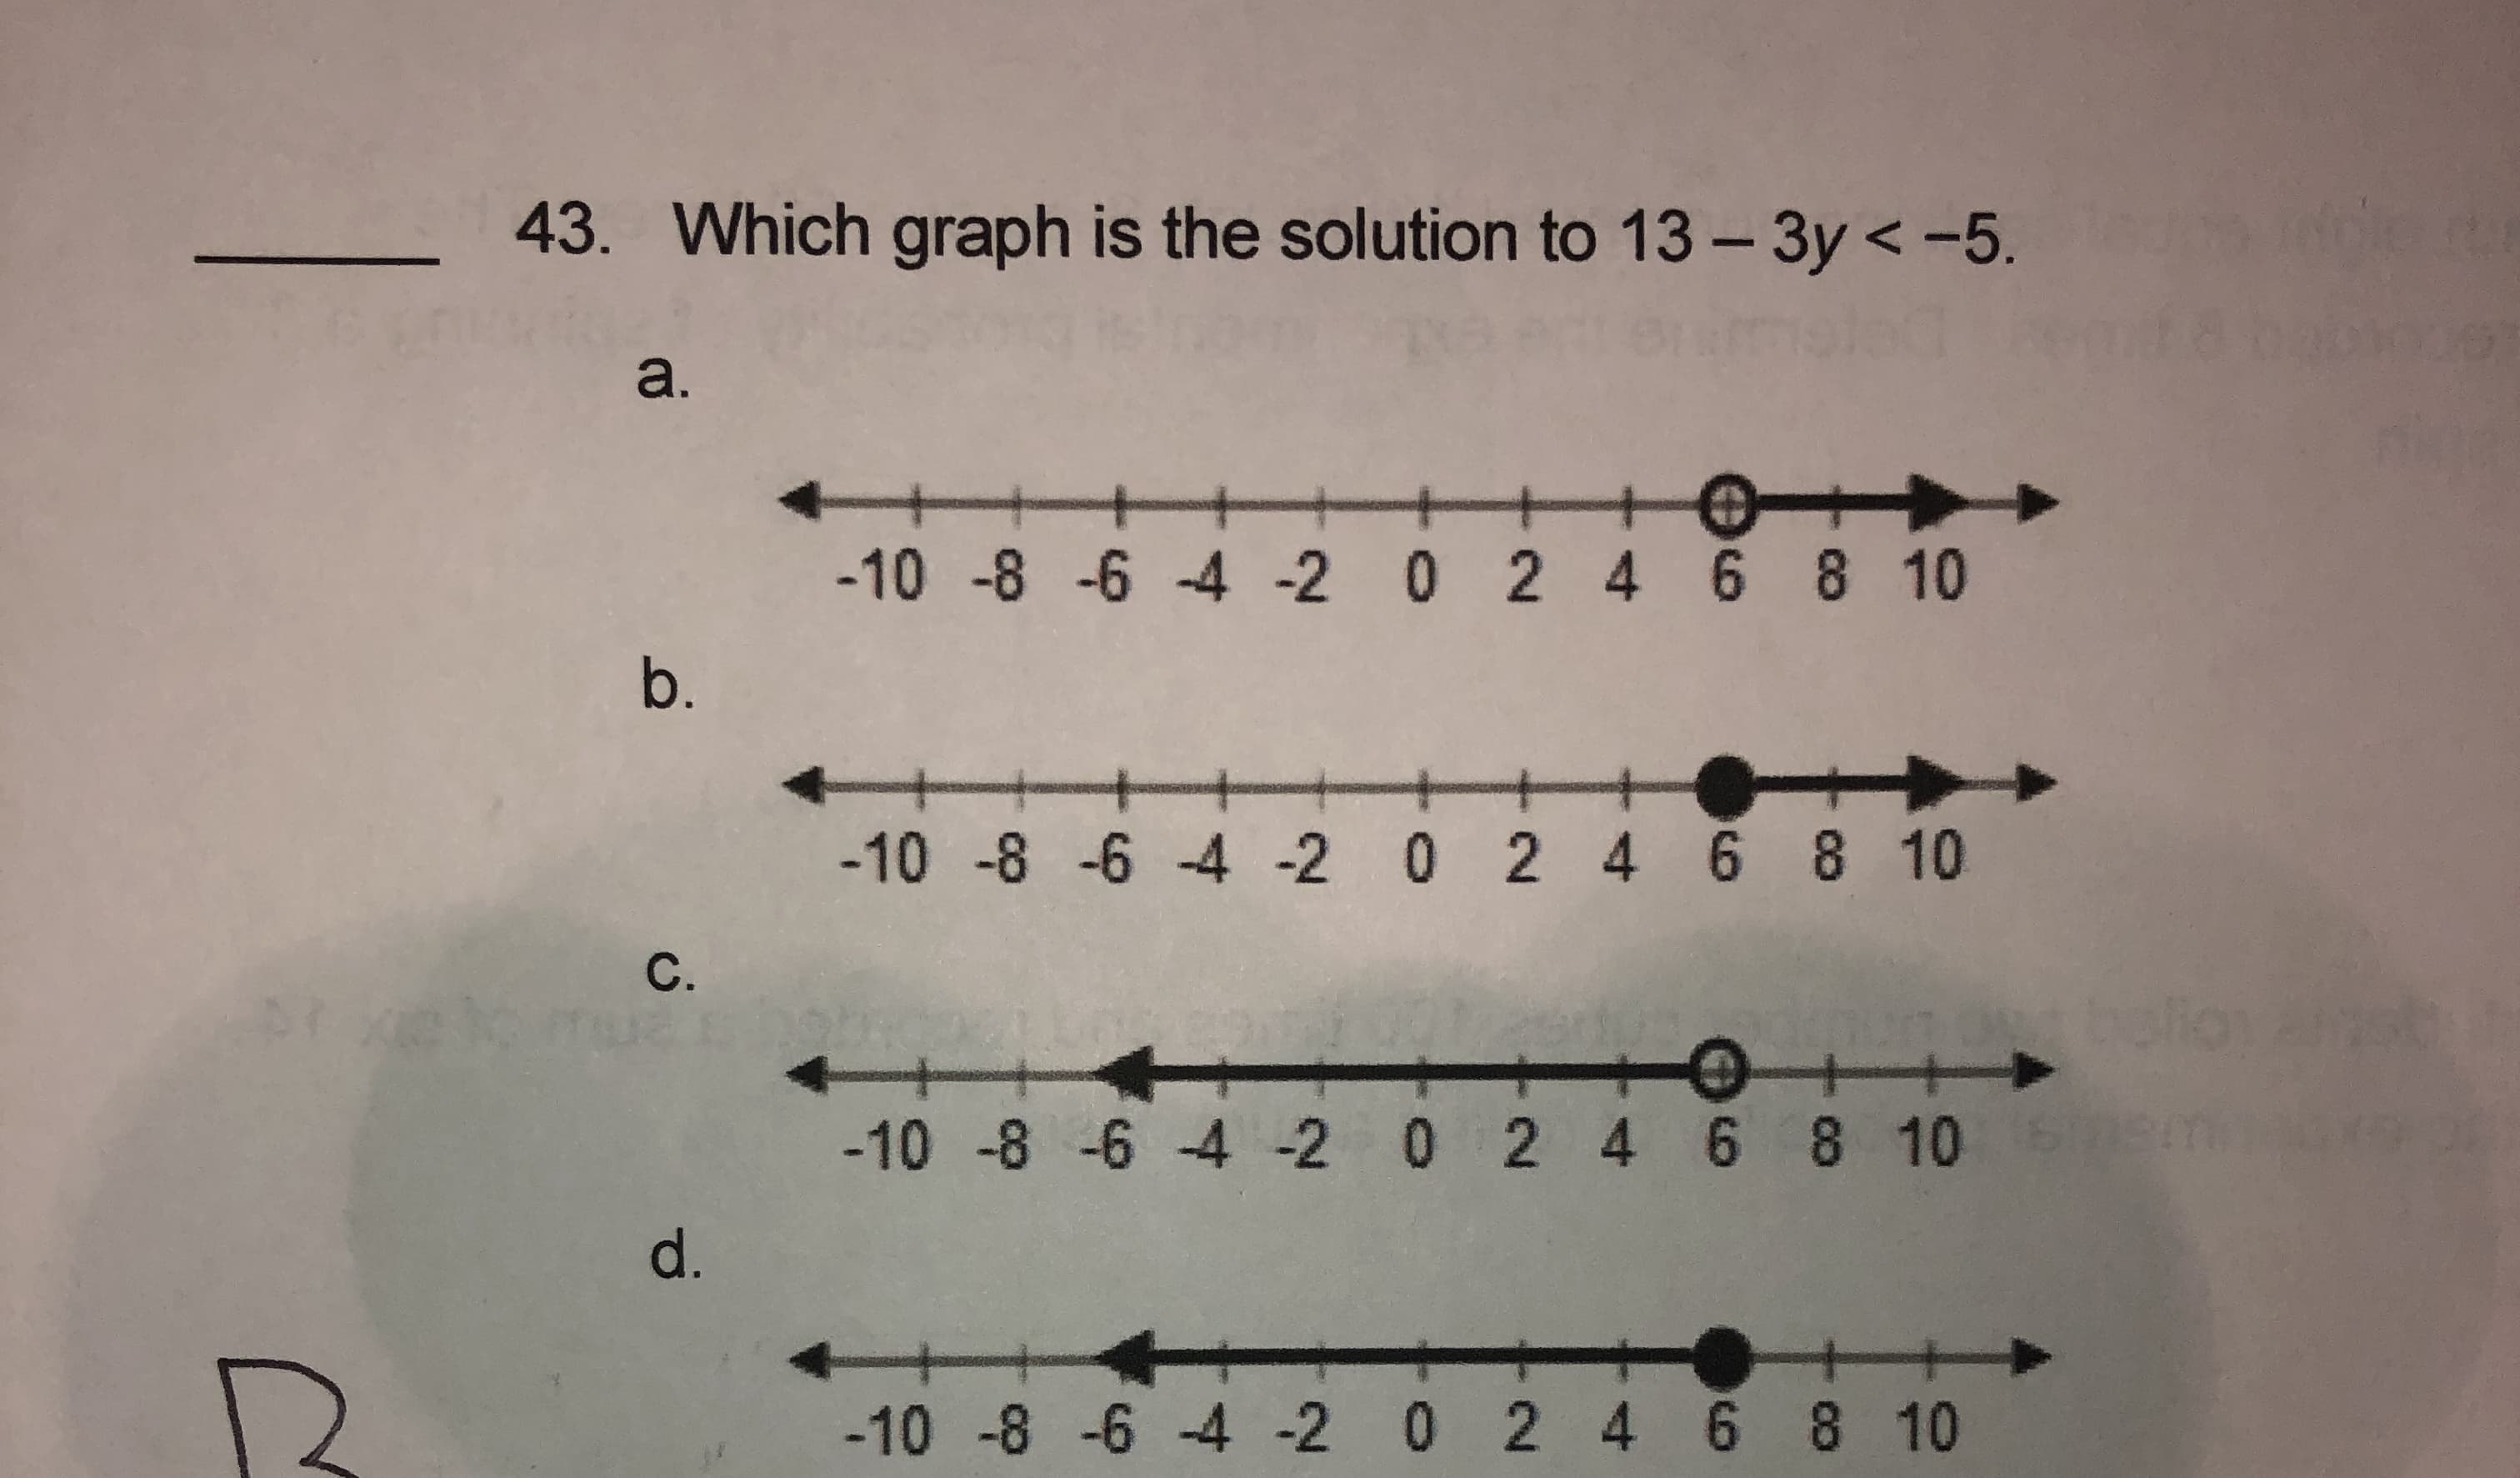 Which graph is the solution to 13 - 3y <-5.
